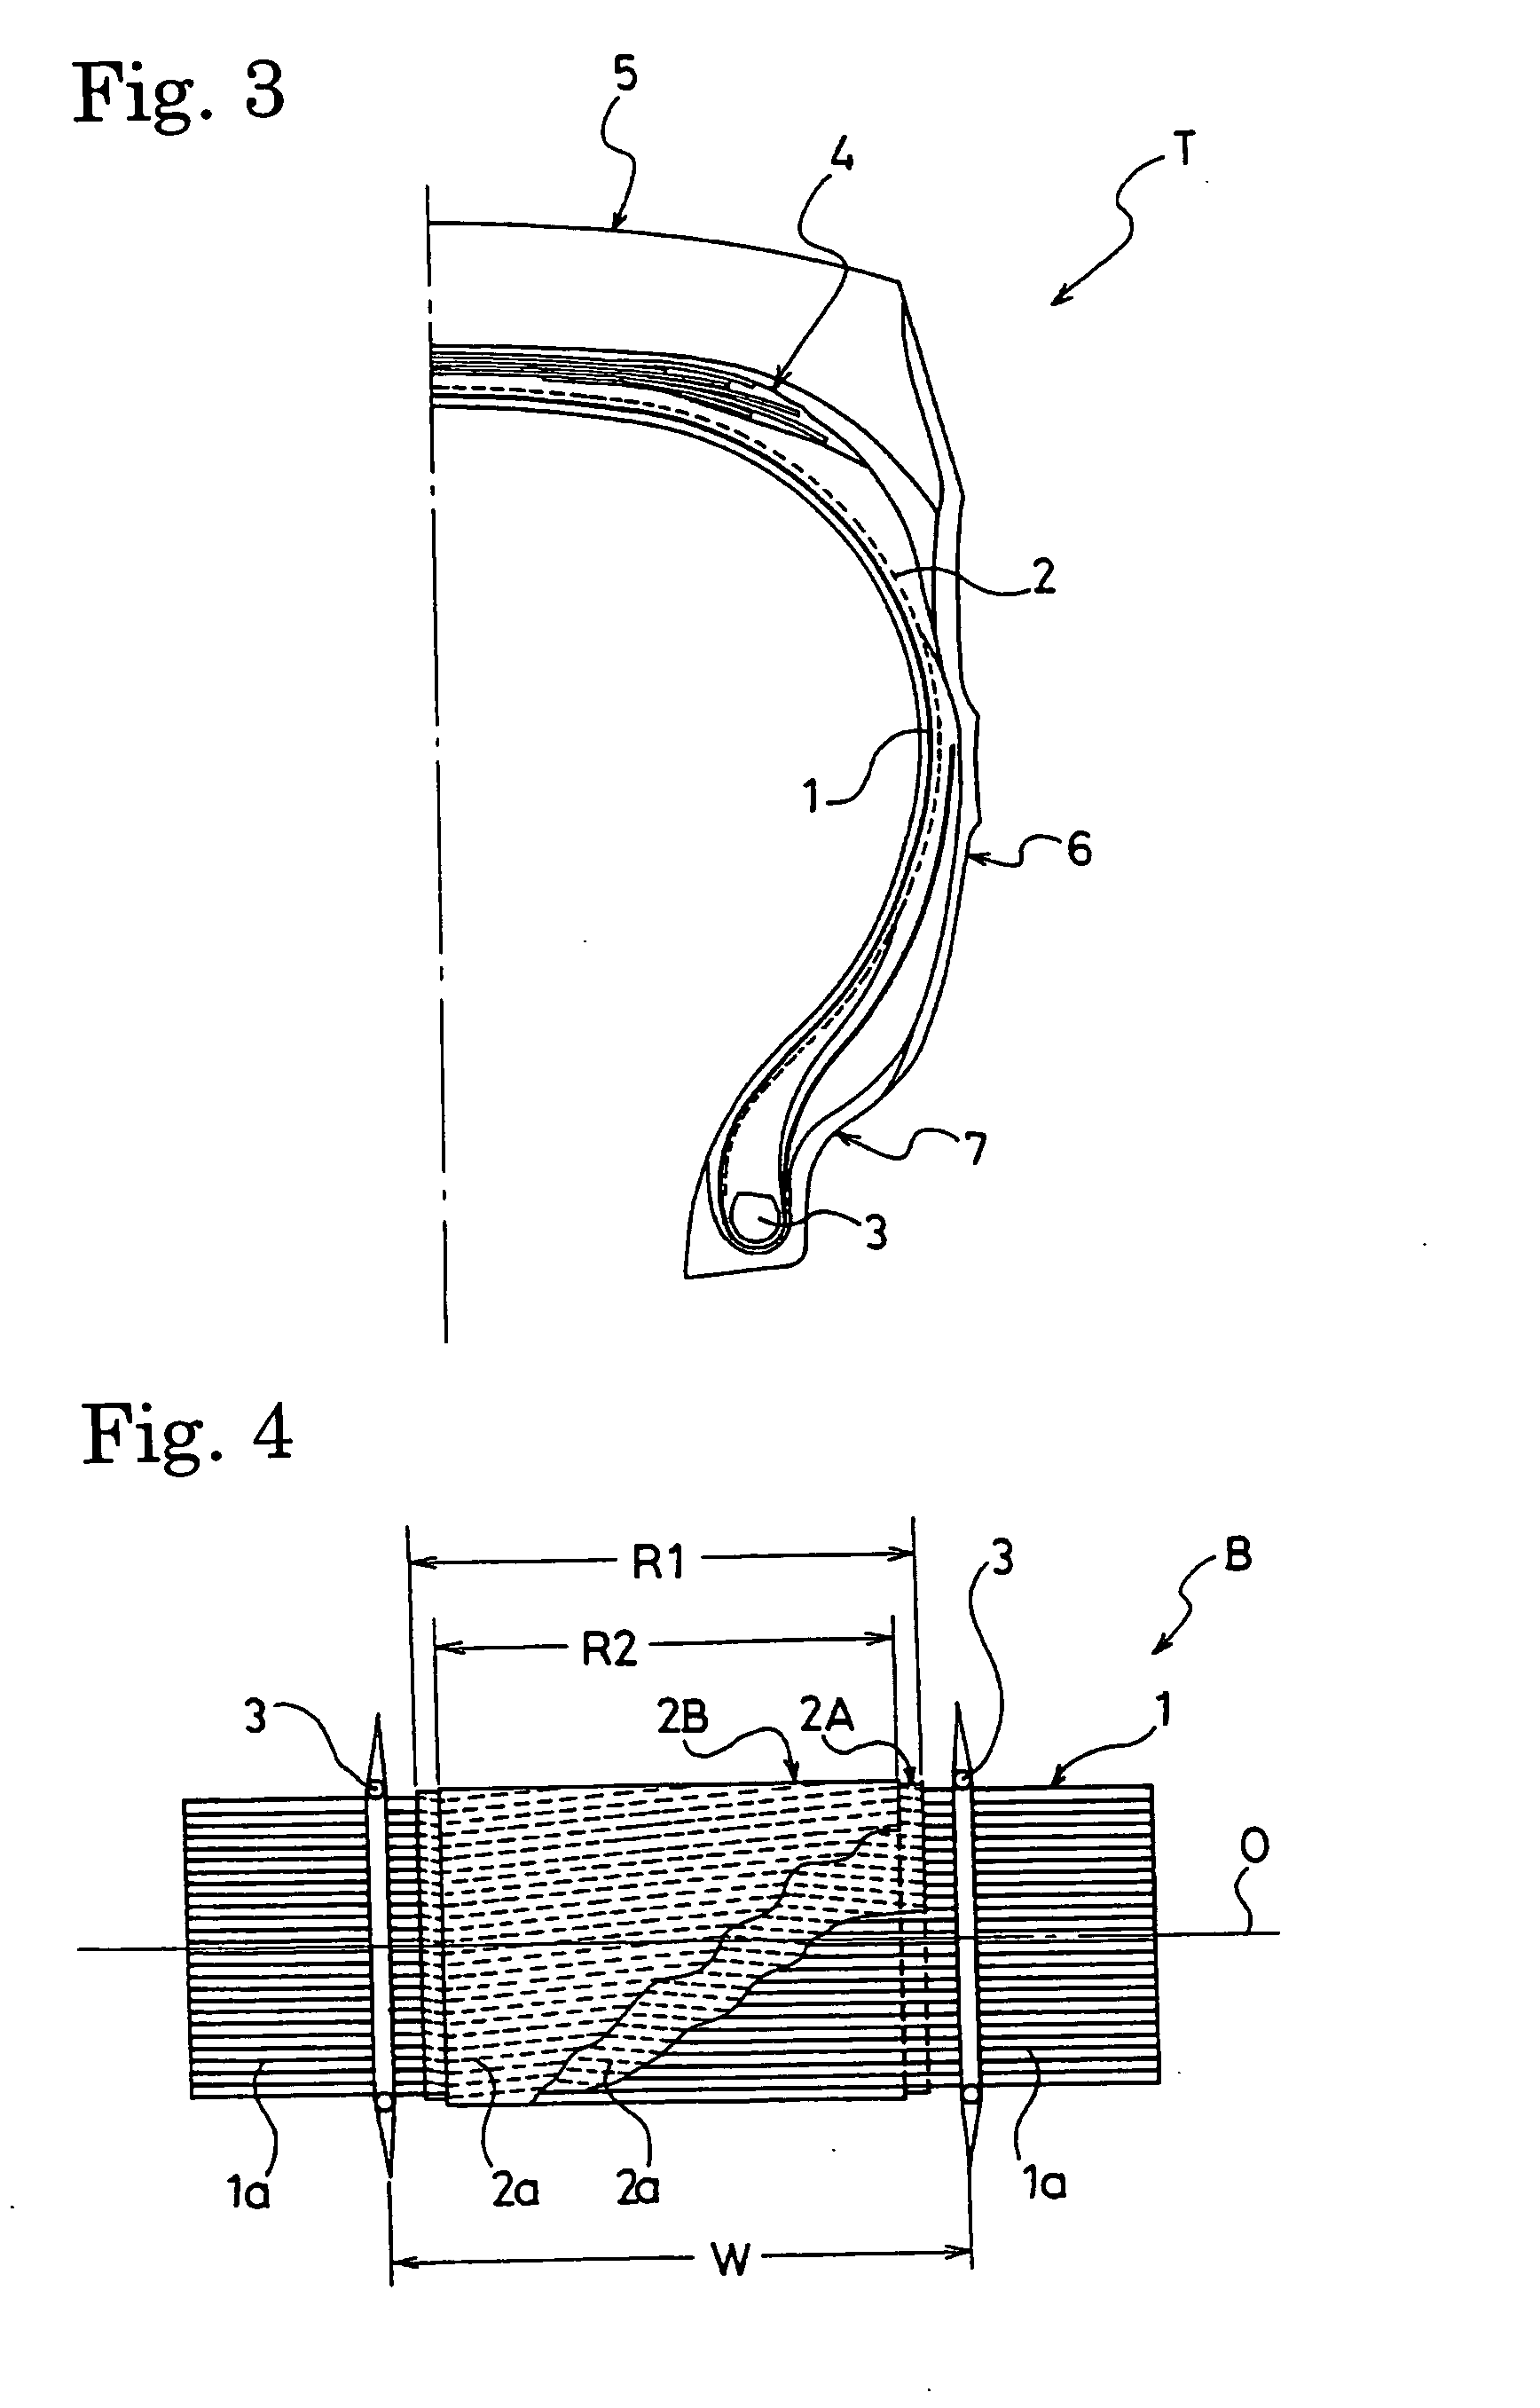 Method of Manufacturing Radial Tire for Construction Vehicle